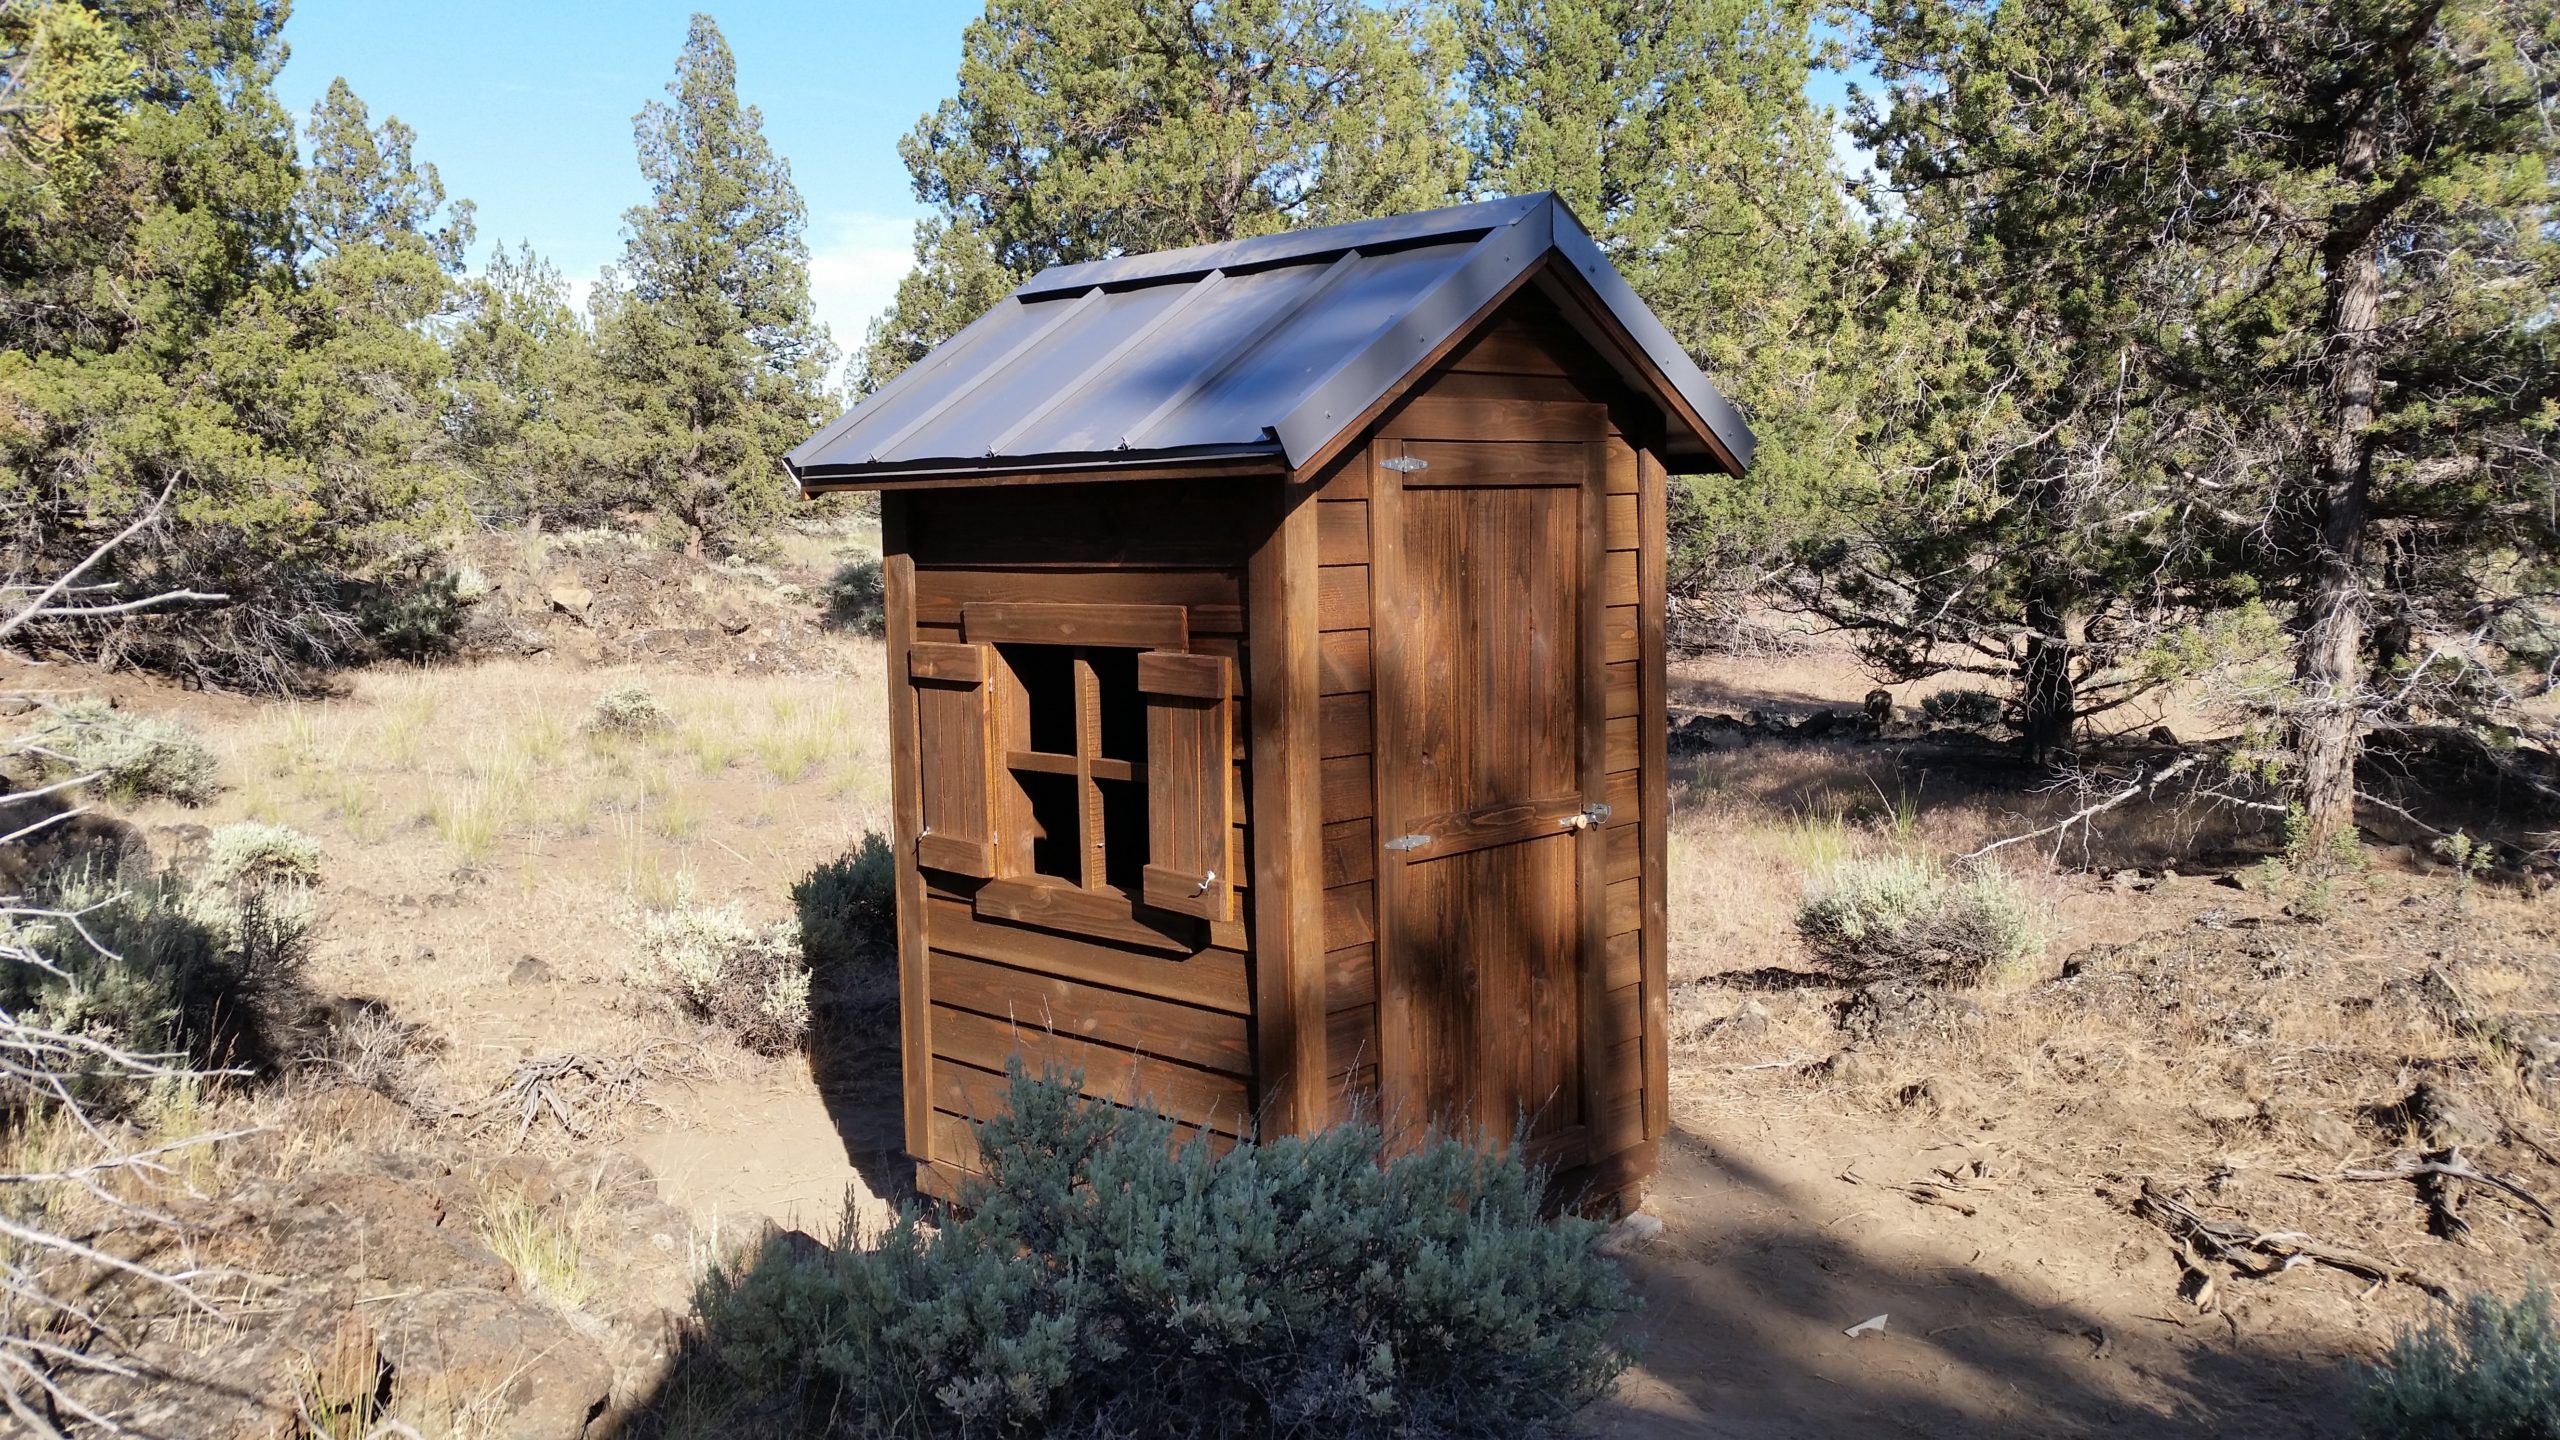 Oregontimberwerks Rustic Cabins, Playhouses, Sheds, and 